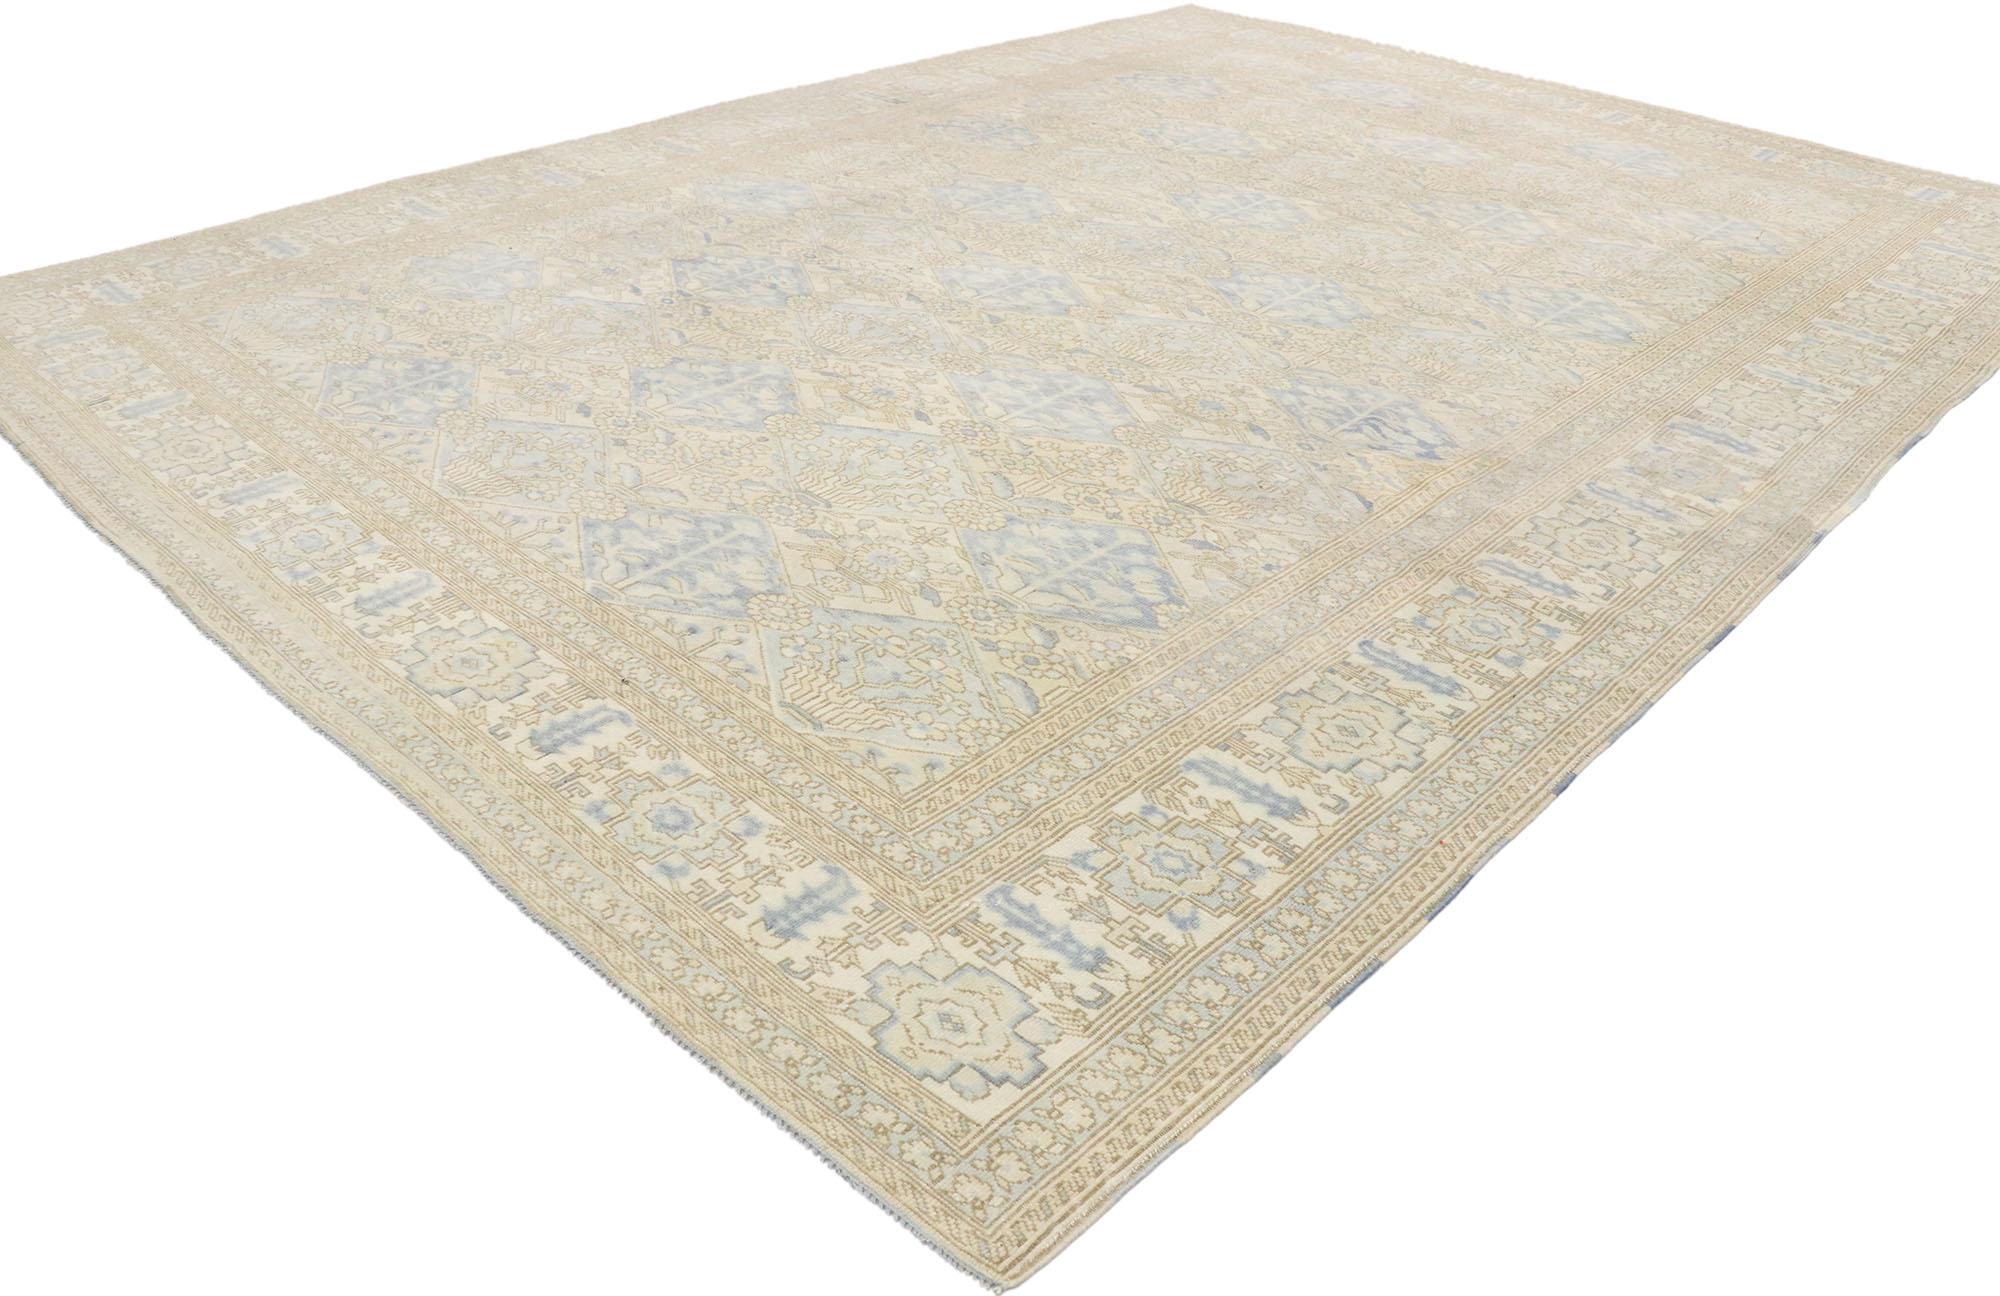 53259, garden design vintage Turkish Oushak rug with modern coastal style. Balancing traditional sensibility and Coastal style, this hand knotted wool vintage Turkish Oushak rug is poised to impress. The abrashed antique washed field features an